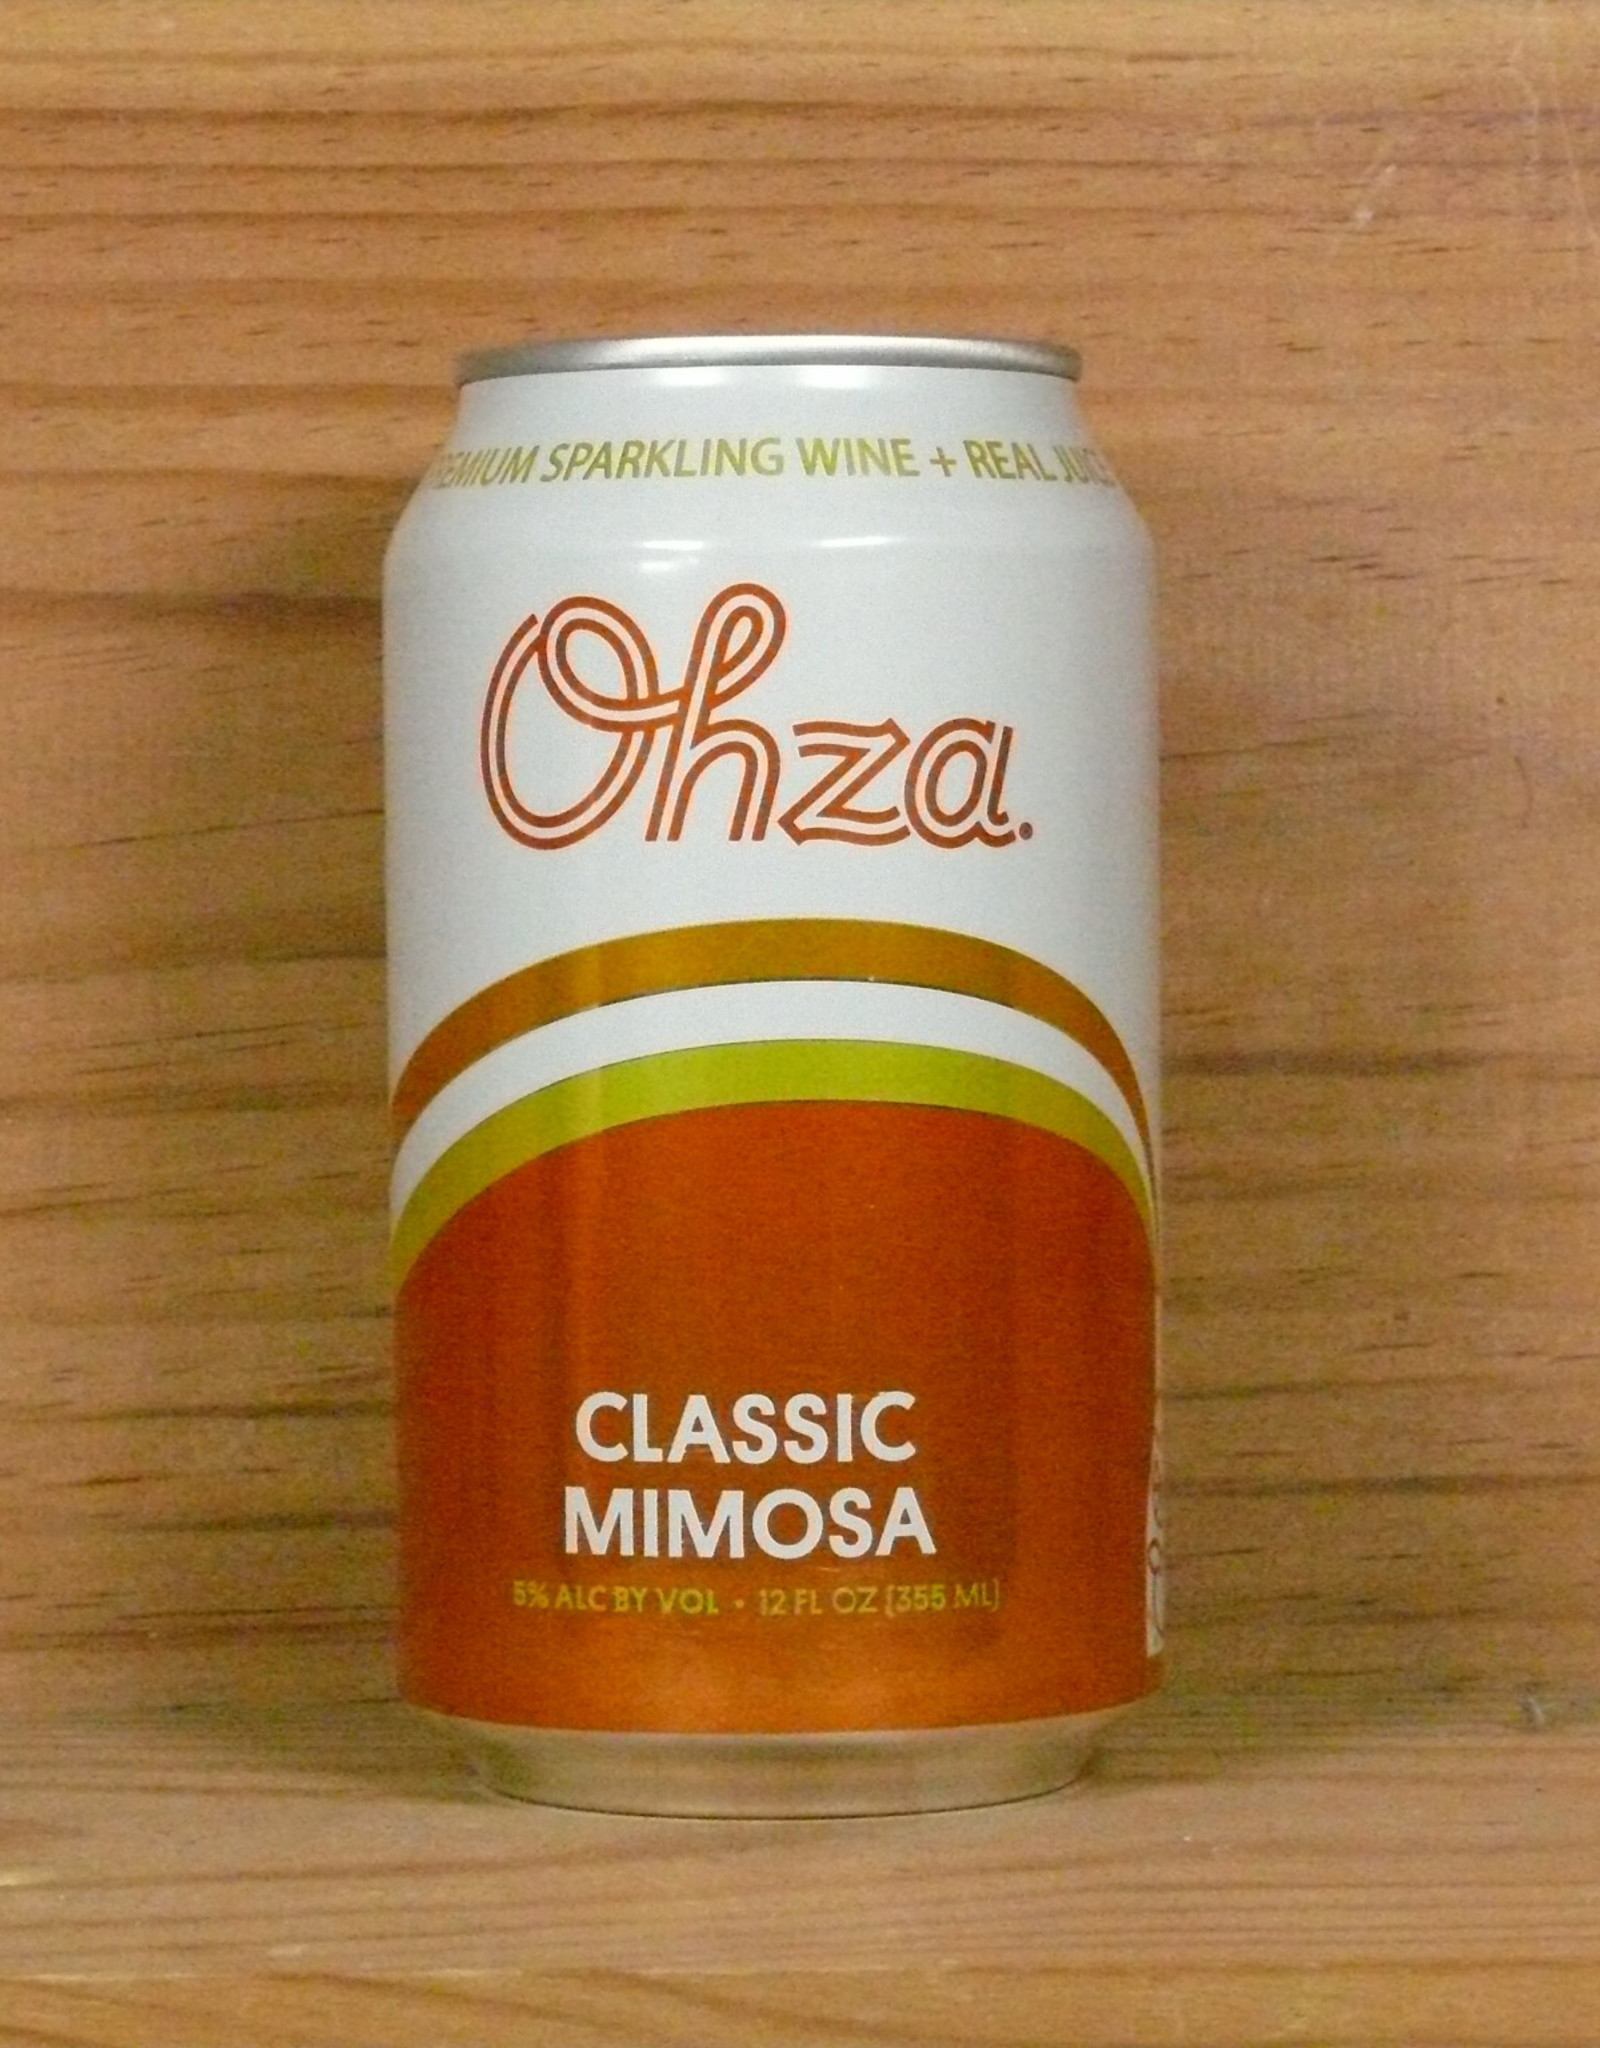 Ohza - Classic Mimosa in a can!